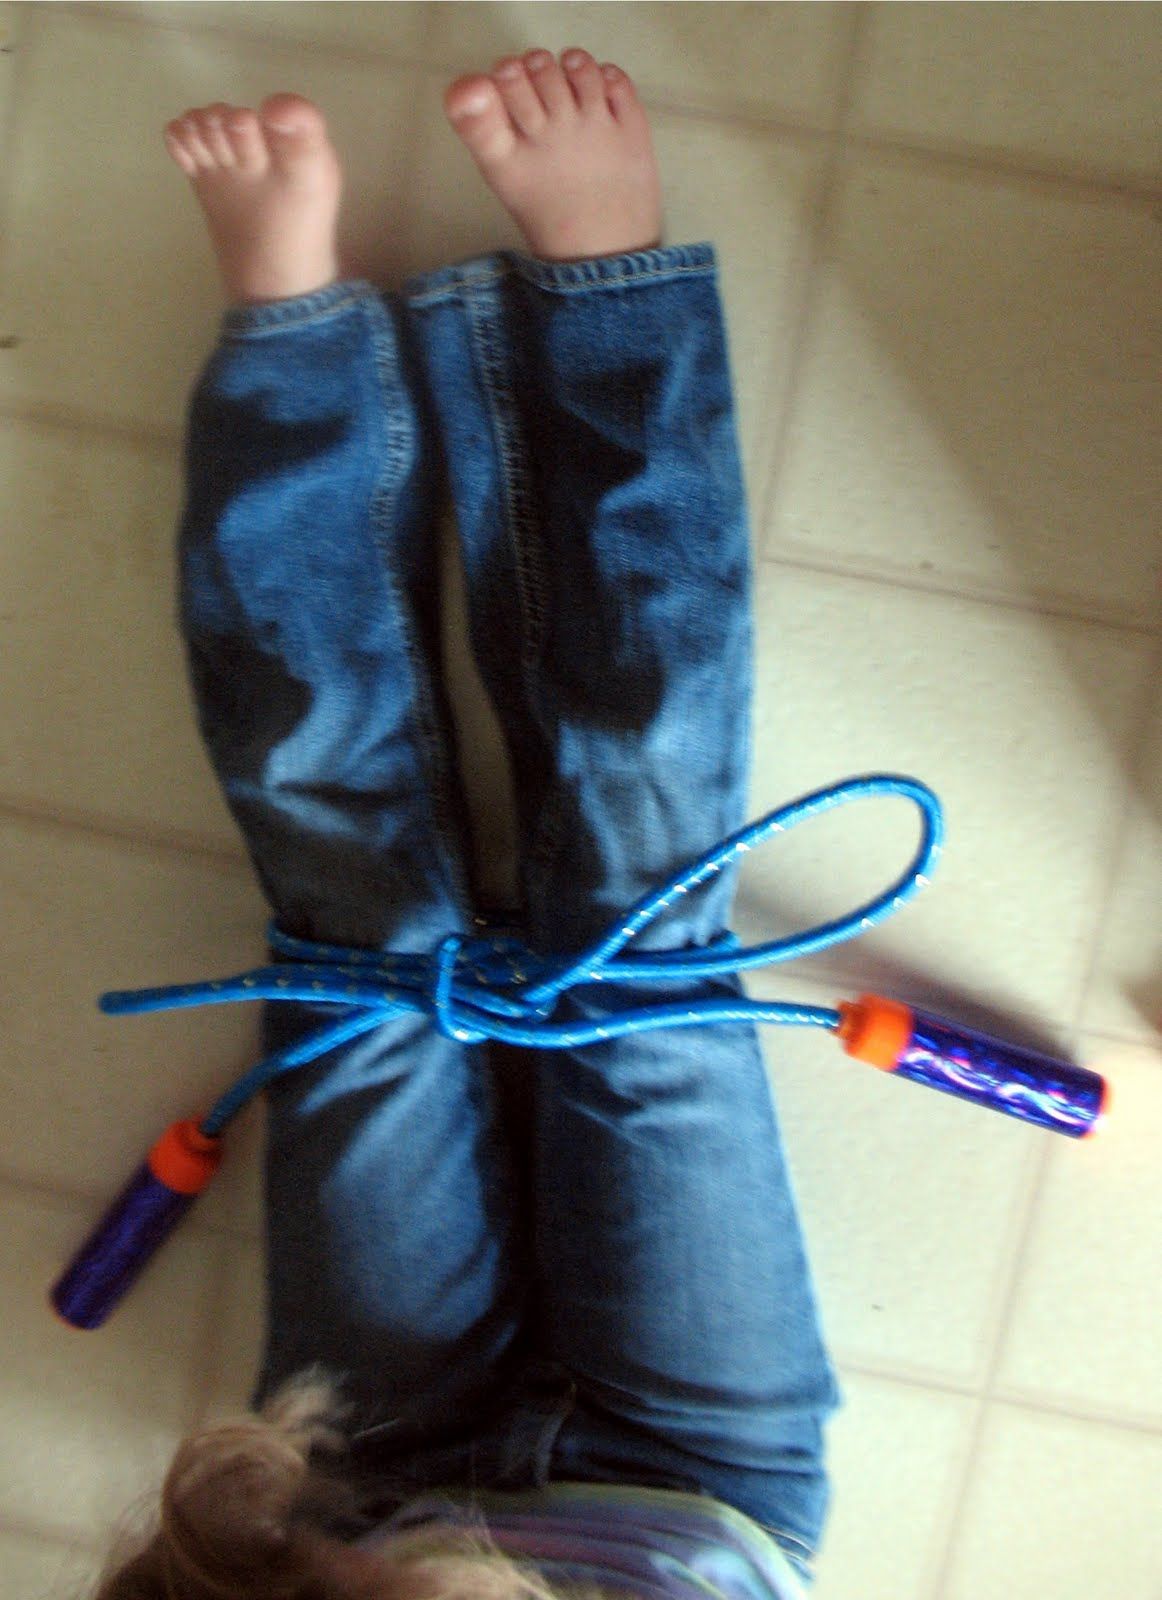 Smart! Teach a child to tie their shoes using a jump rope so they can see a larg